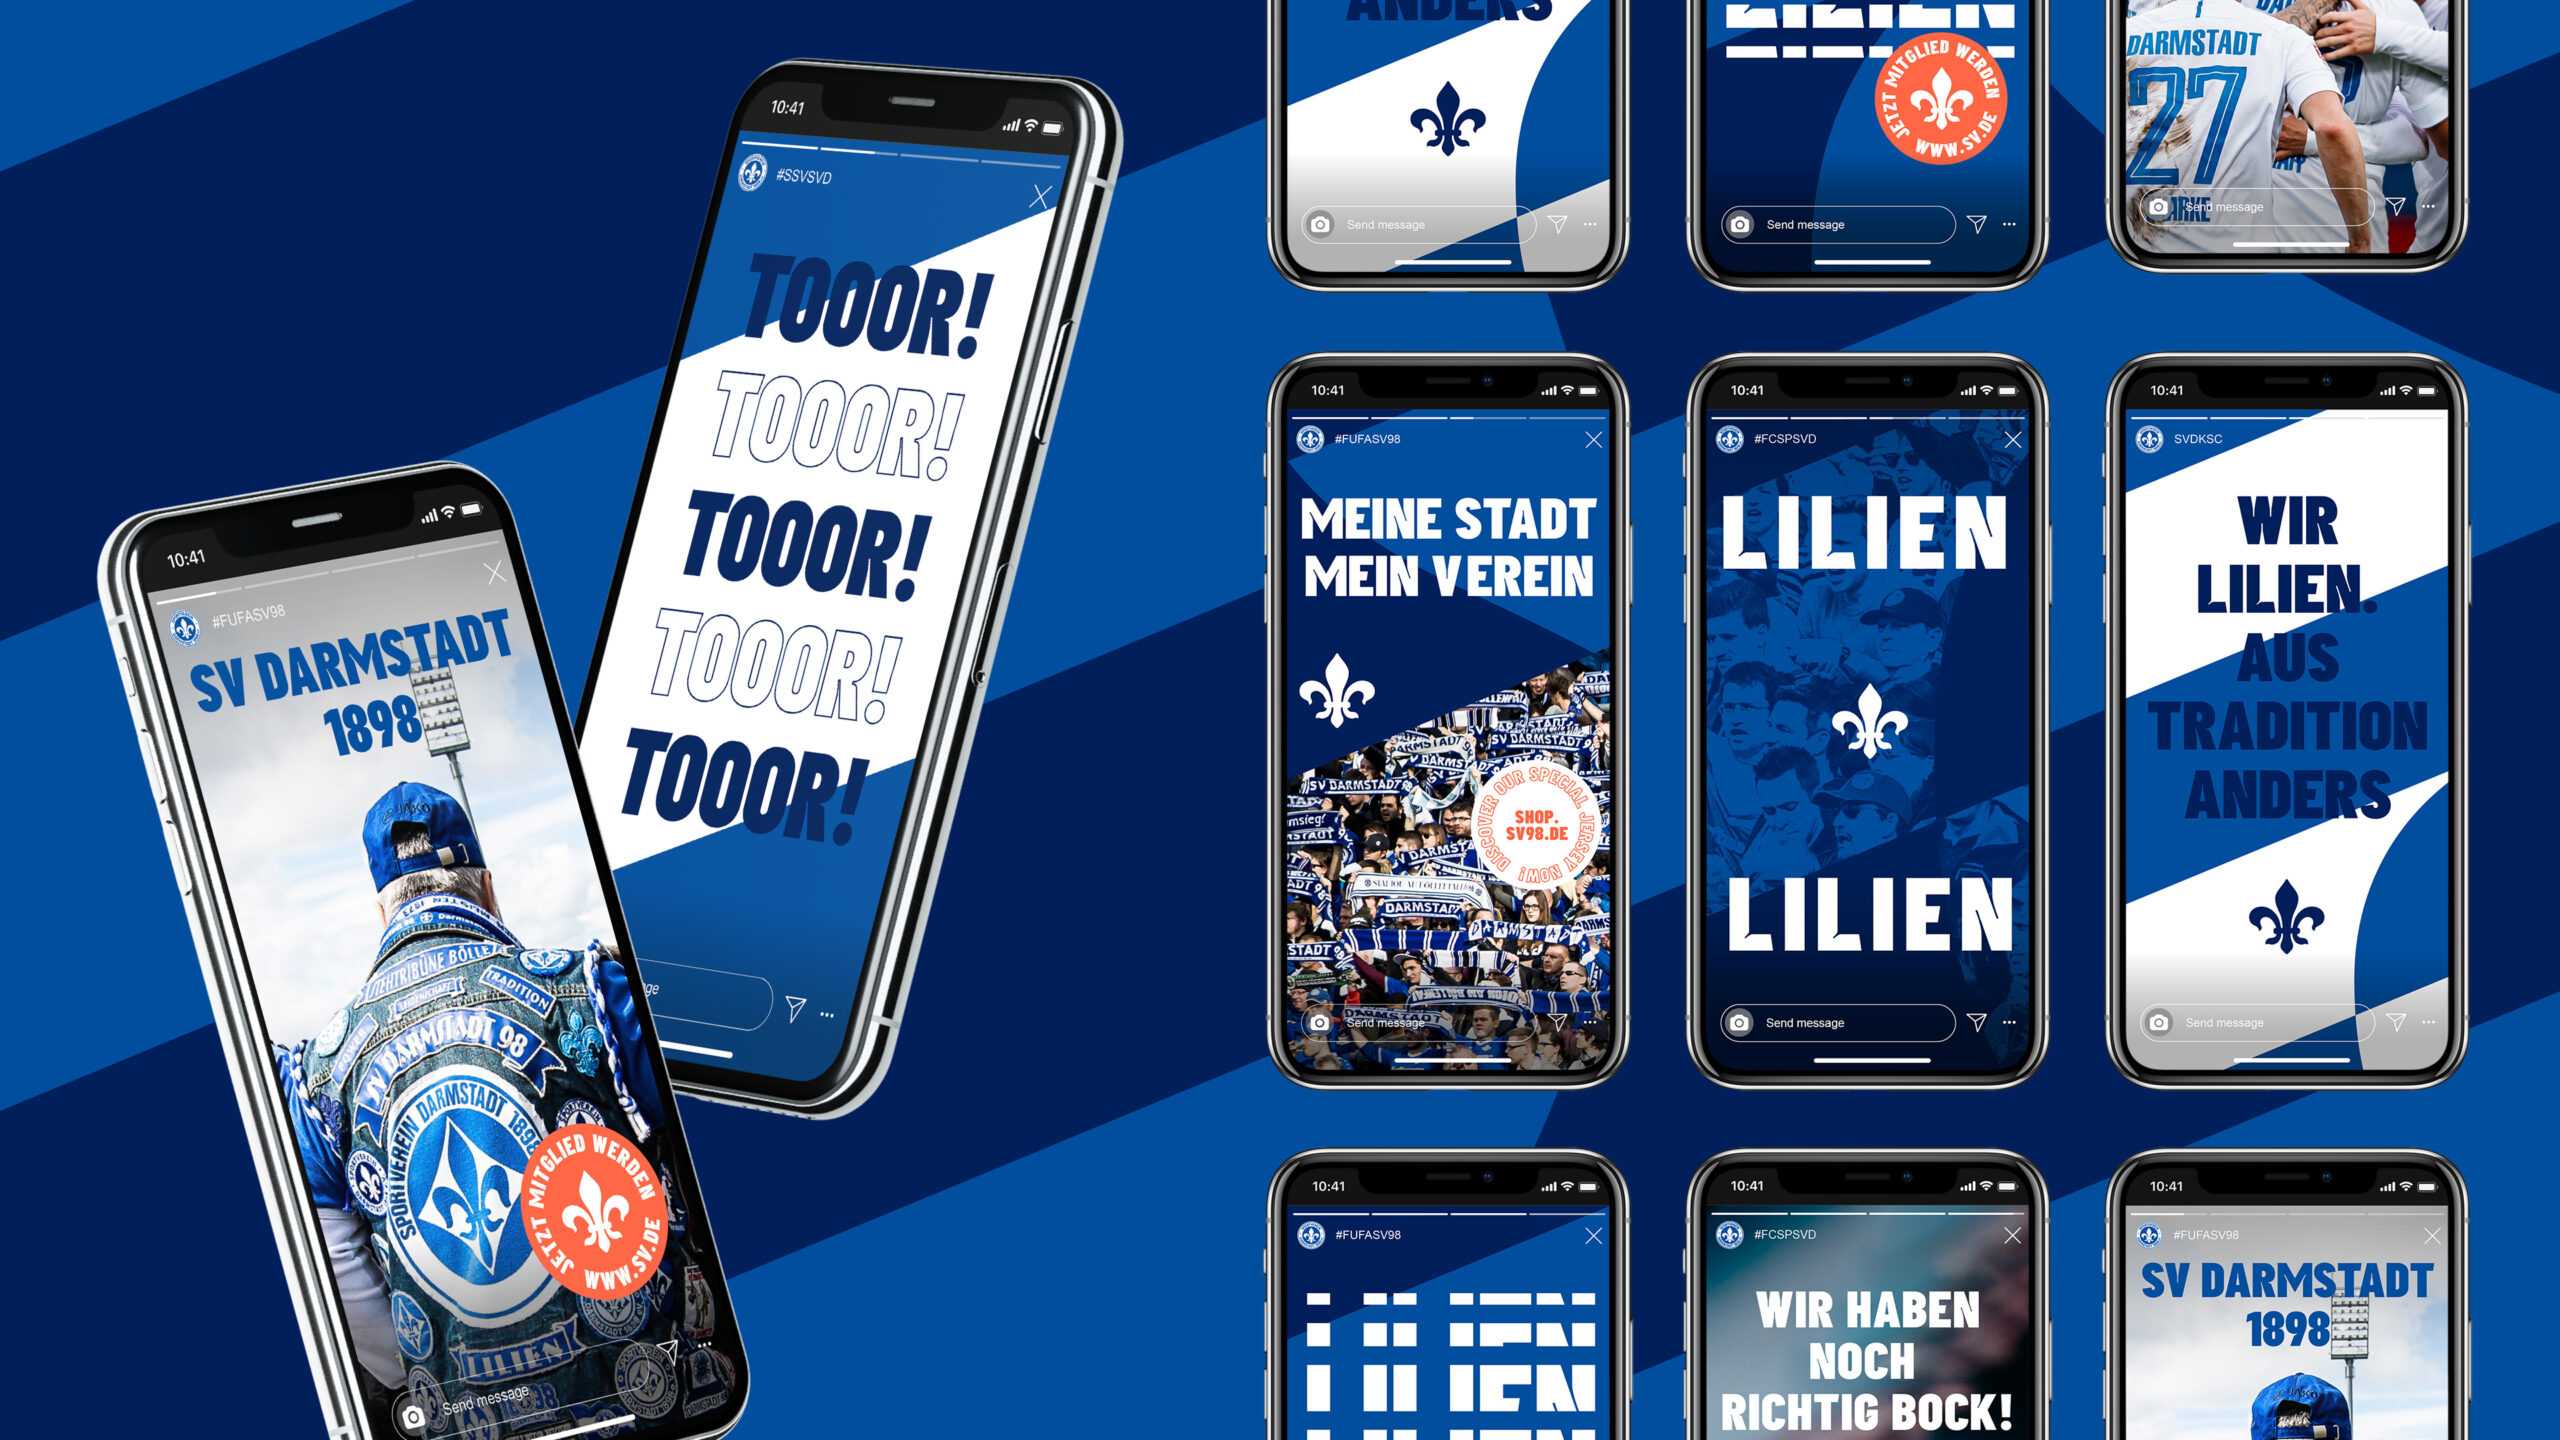 Phone Mockup with Instagram Stories for Lilien